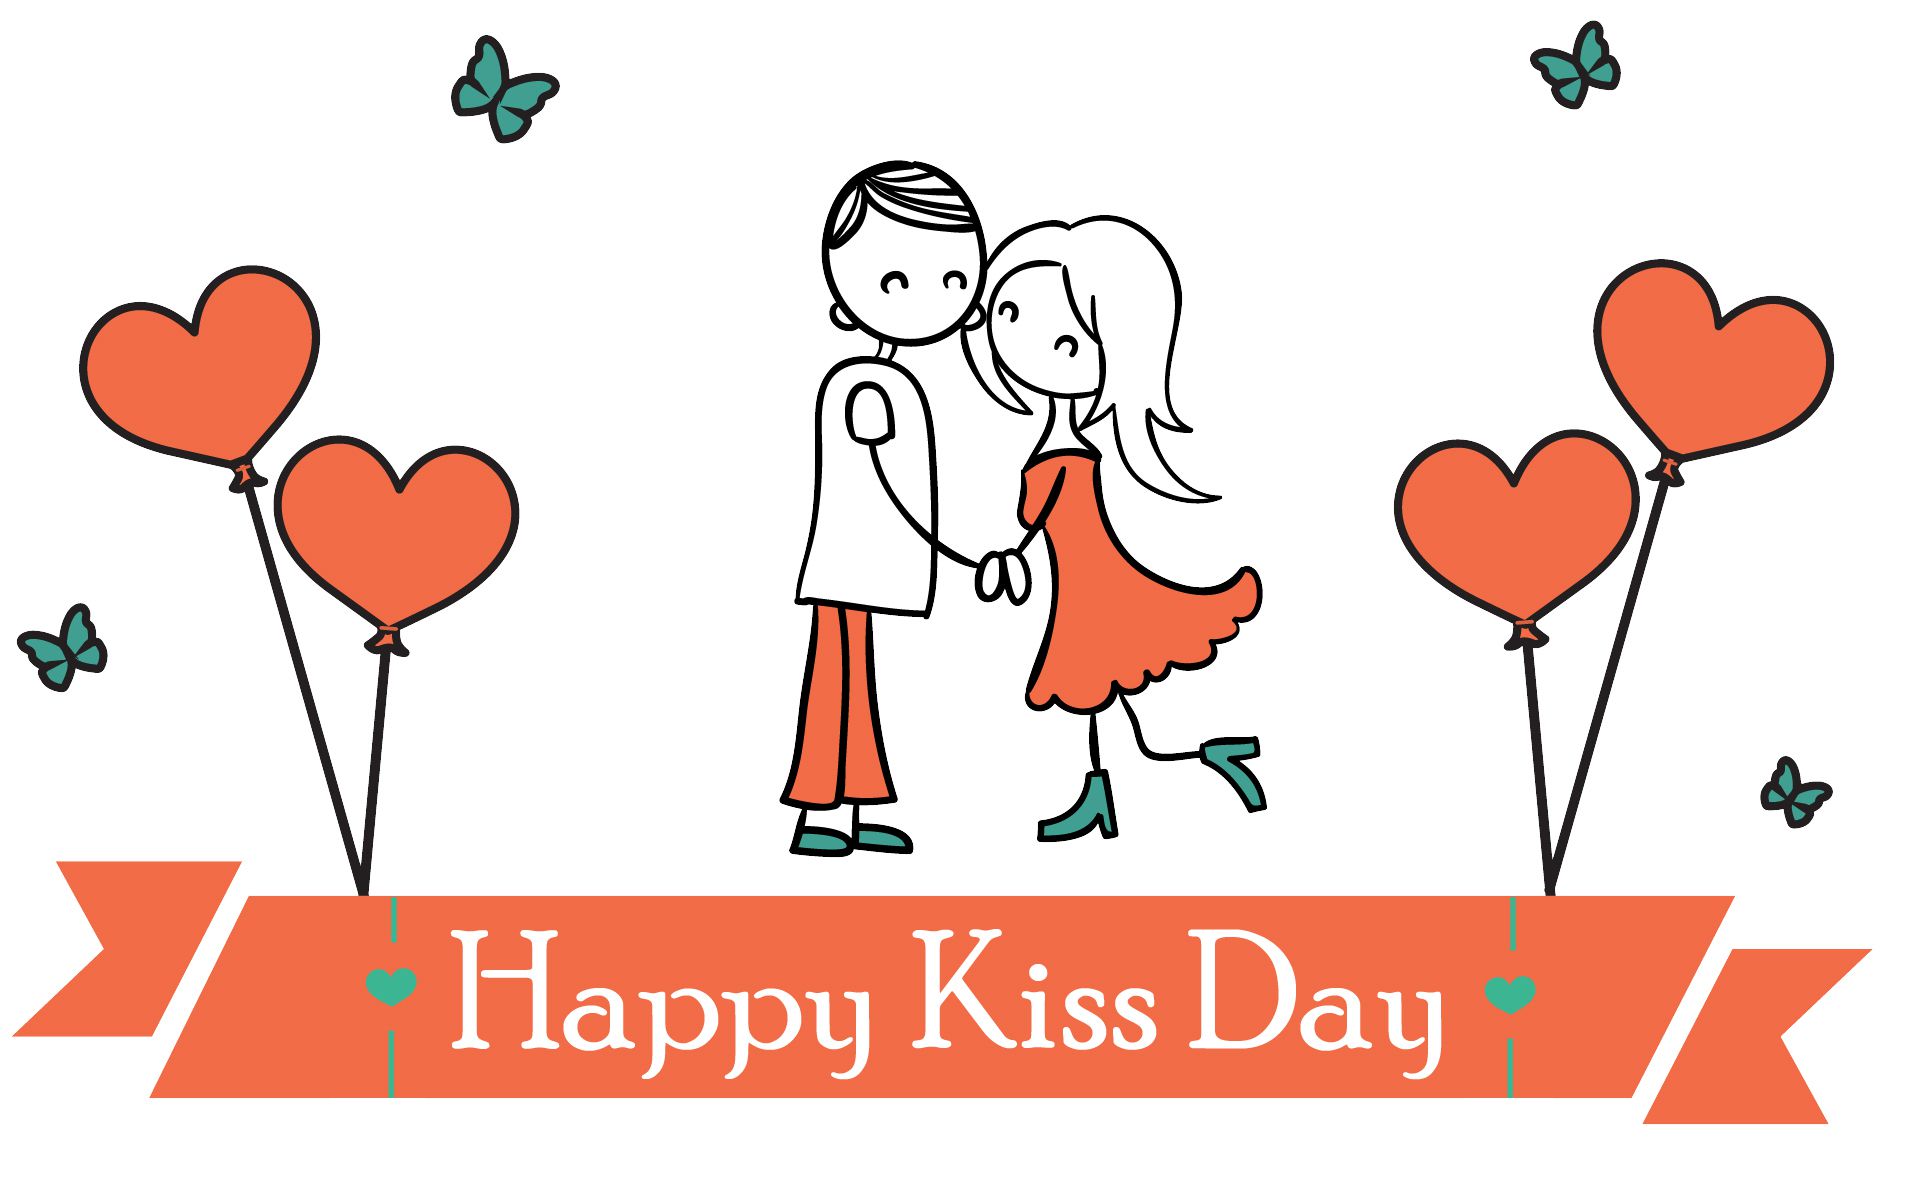 Happy Hug day short quotes, wishes for your love and wallpaper stories for mobiles